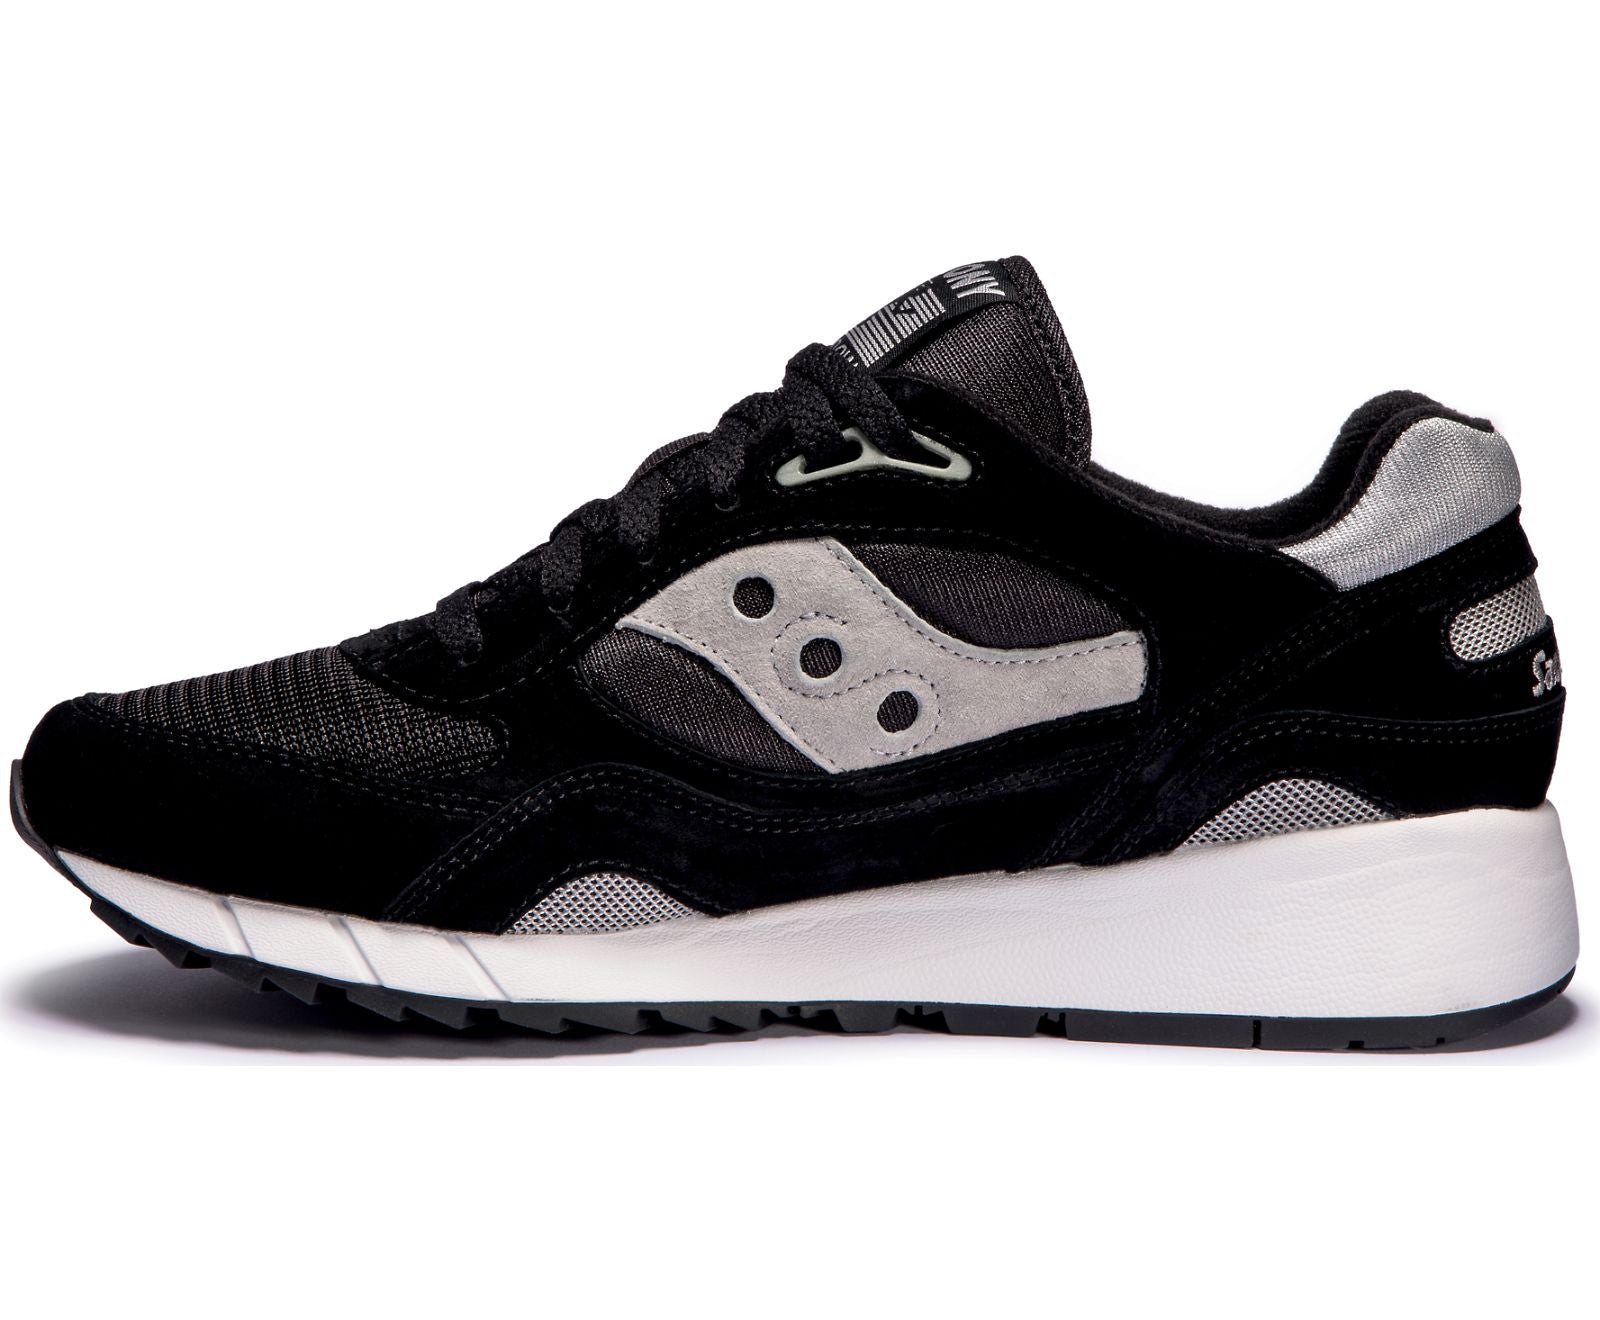 Medial view of the Men's Saucony Shadow 6000 in Black/Silver